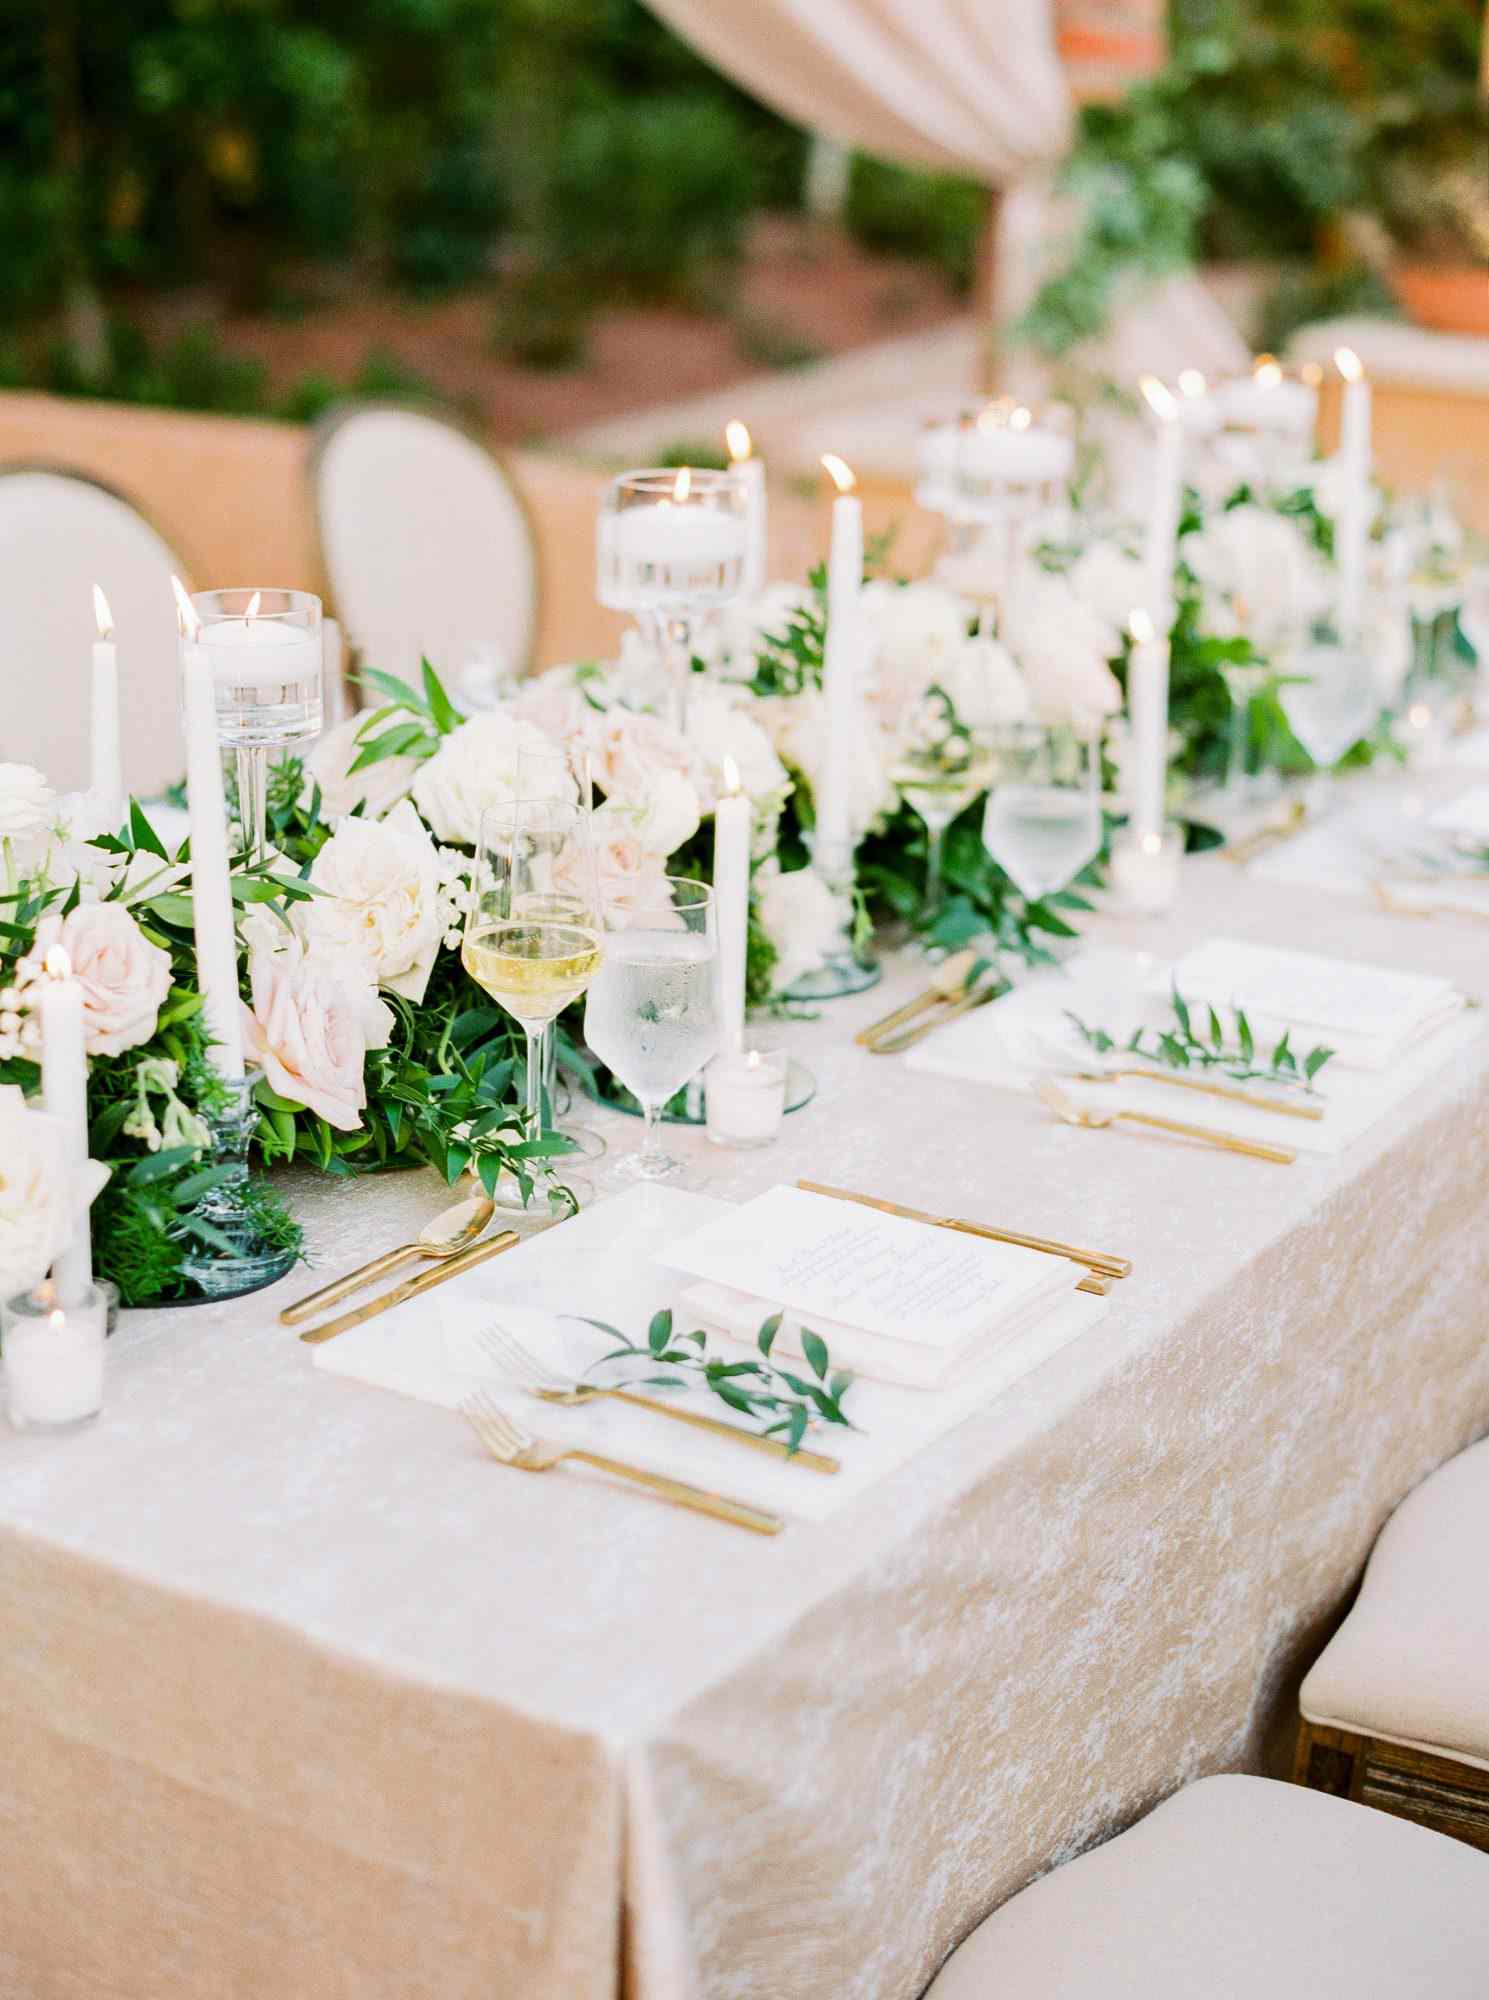 The Place Setting Details